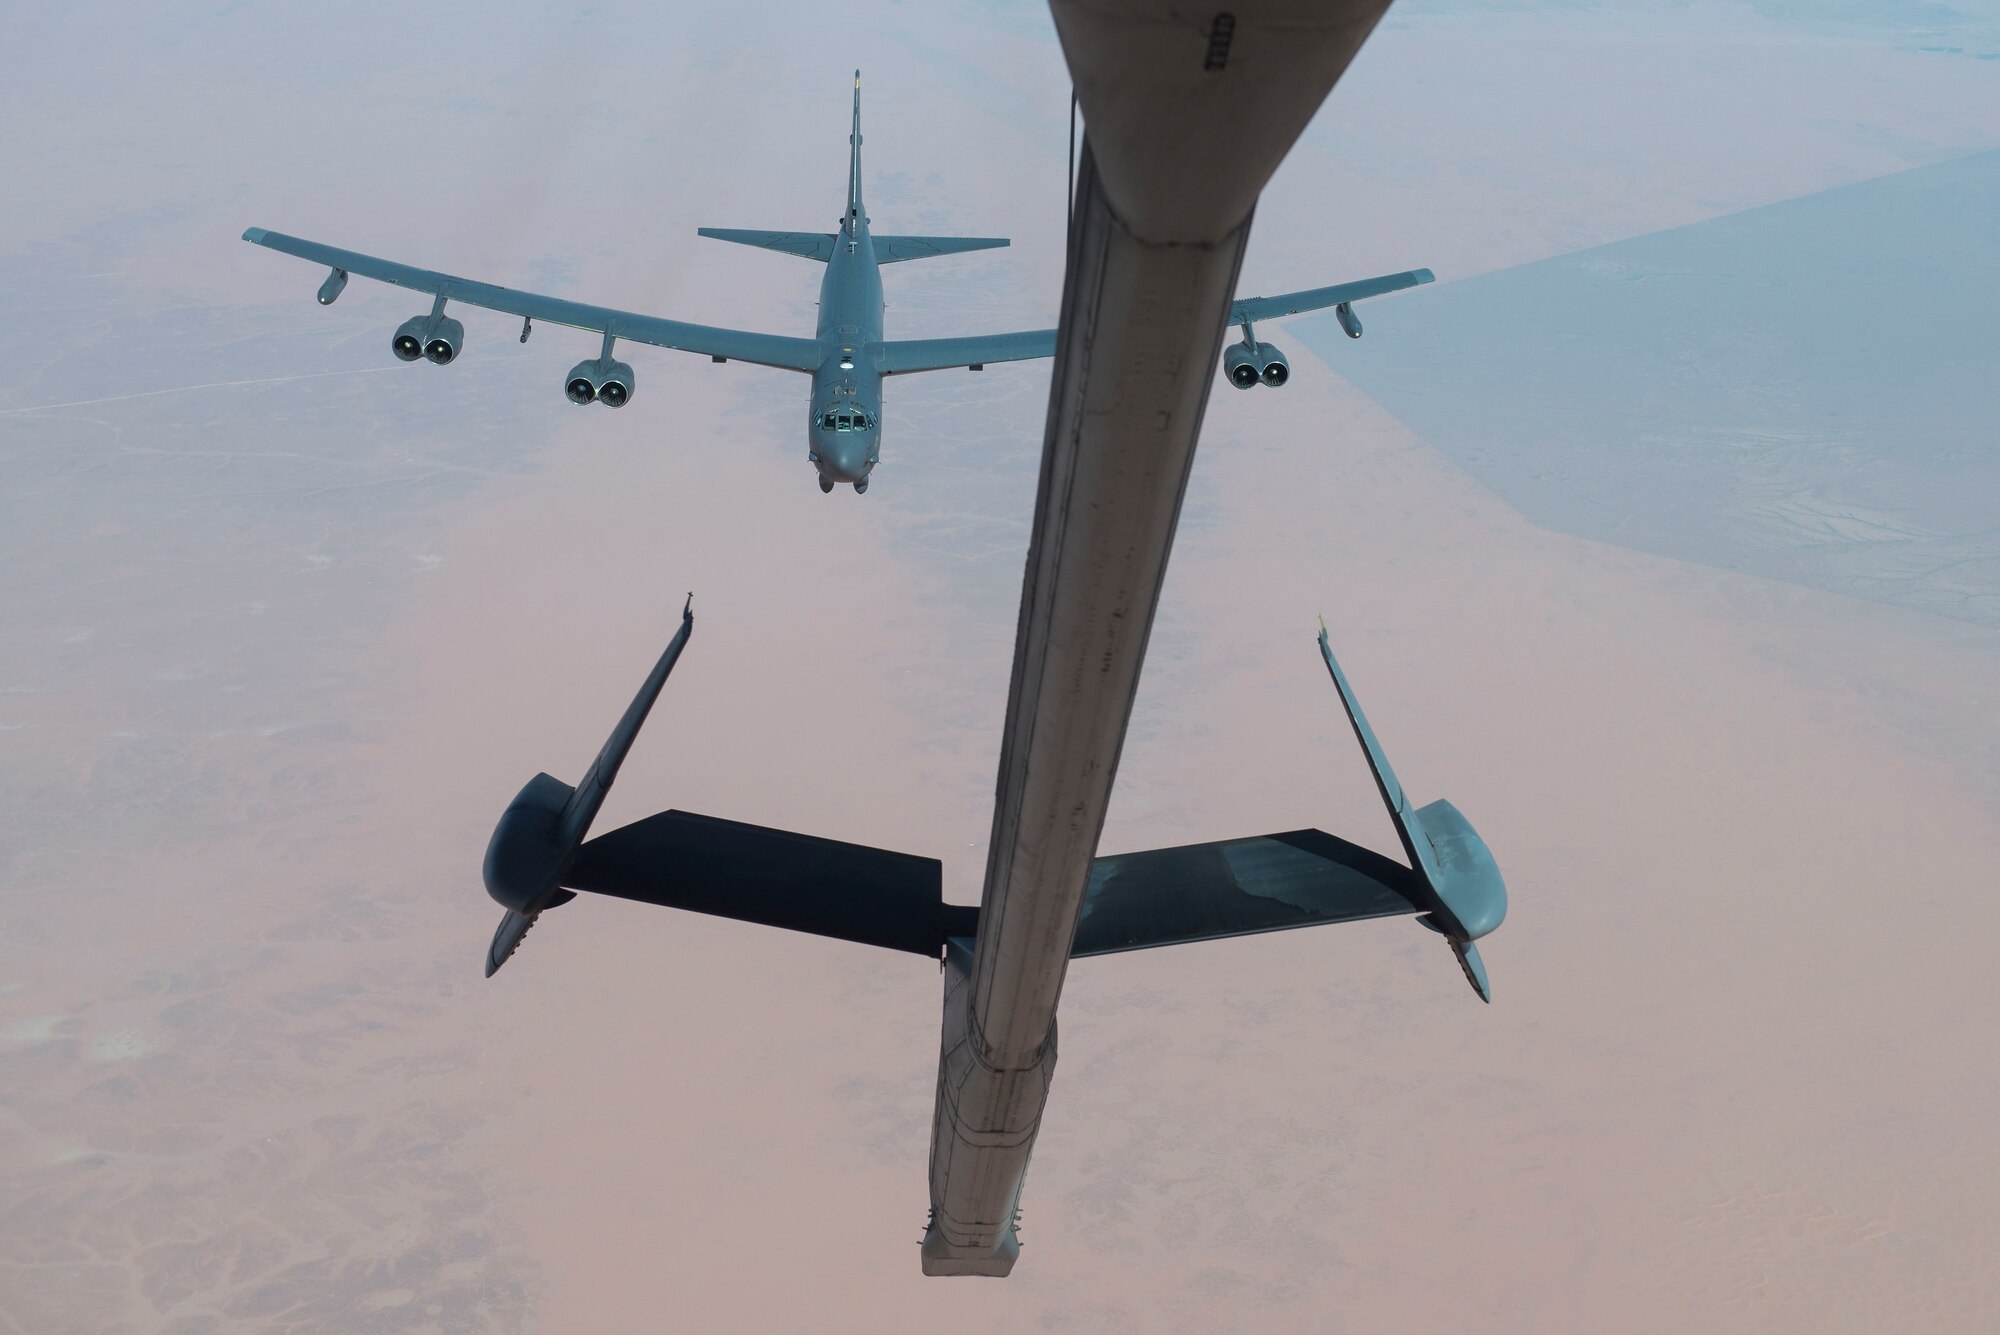 A U.S. Air Force B-52 Stratofortress assigned to the 5th Bomb Wing approaches a KC-10 Extender assigned to the 908th Expeditionary Air Refueling Squadron in preparation for aerial refueling over the U.S. Central Command (CENTCOM) area of responsibility (AOR), March 7, 2021.